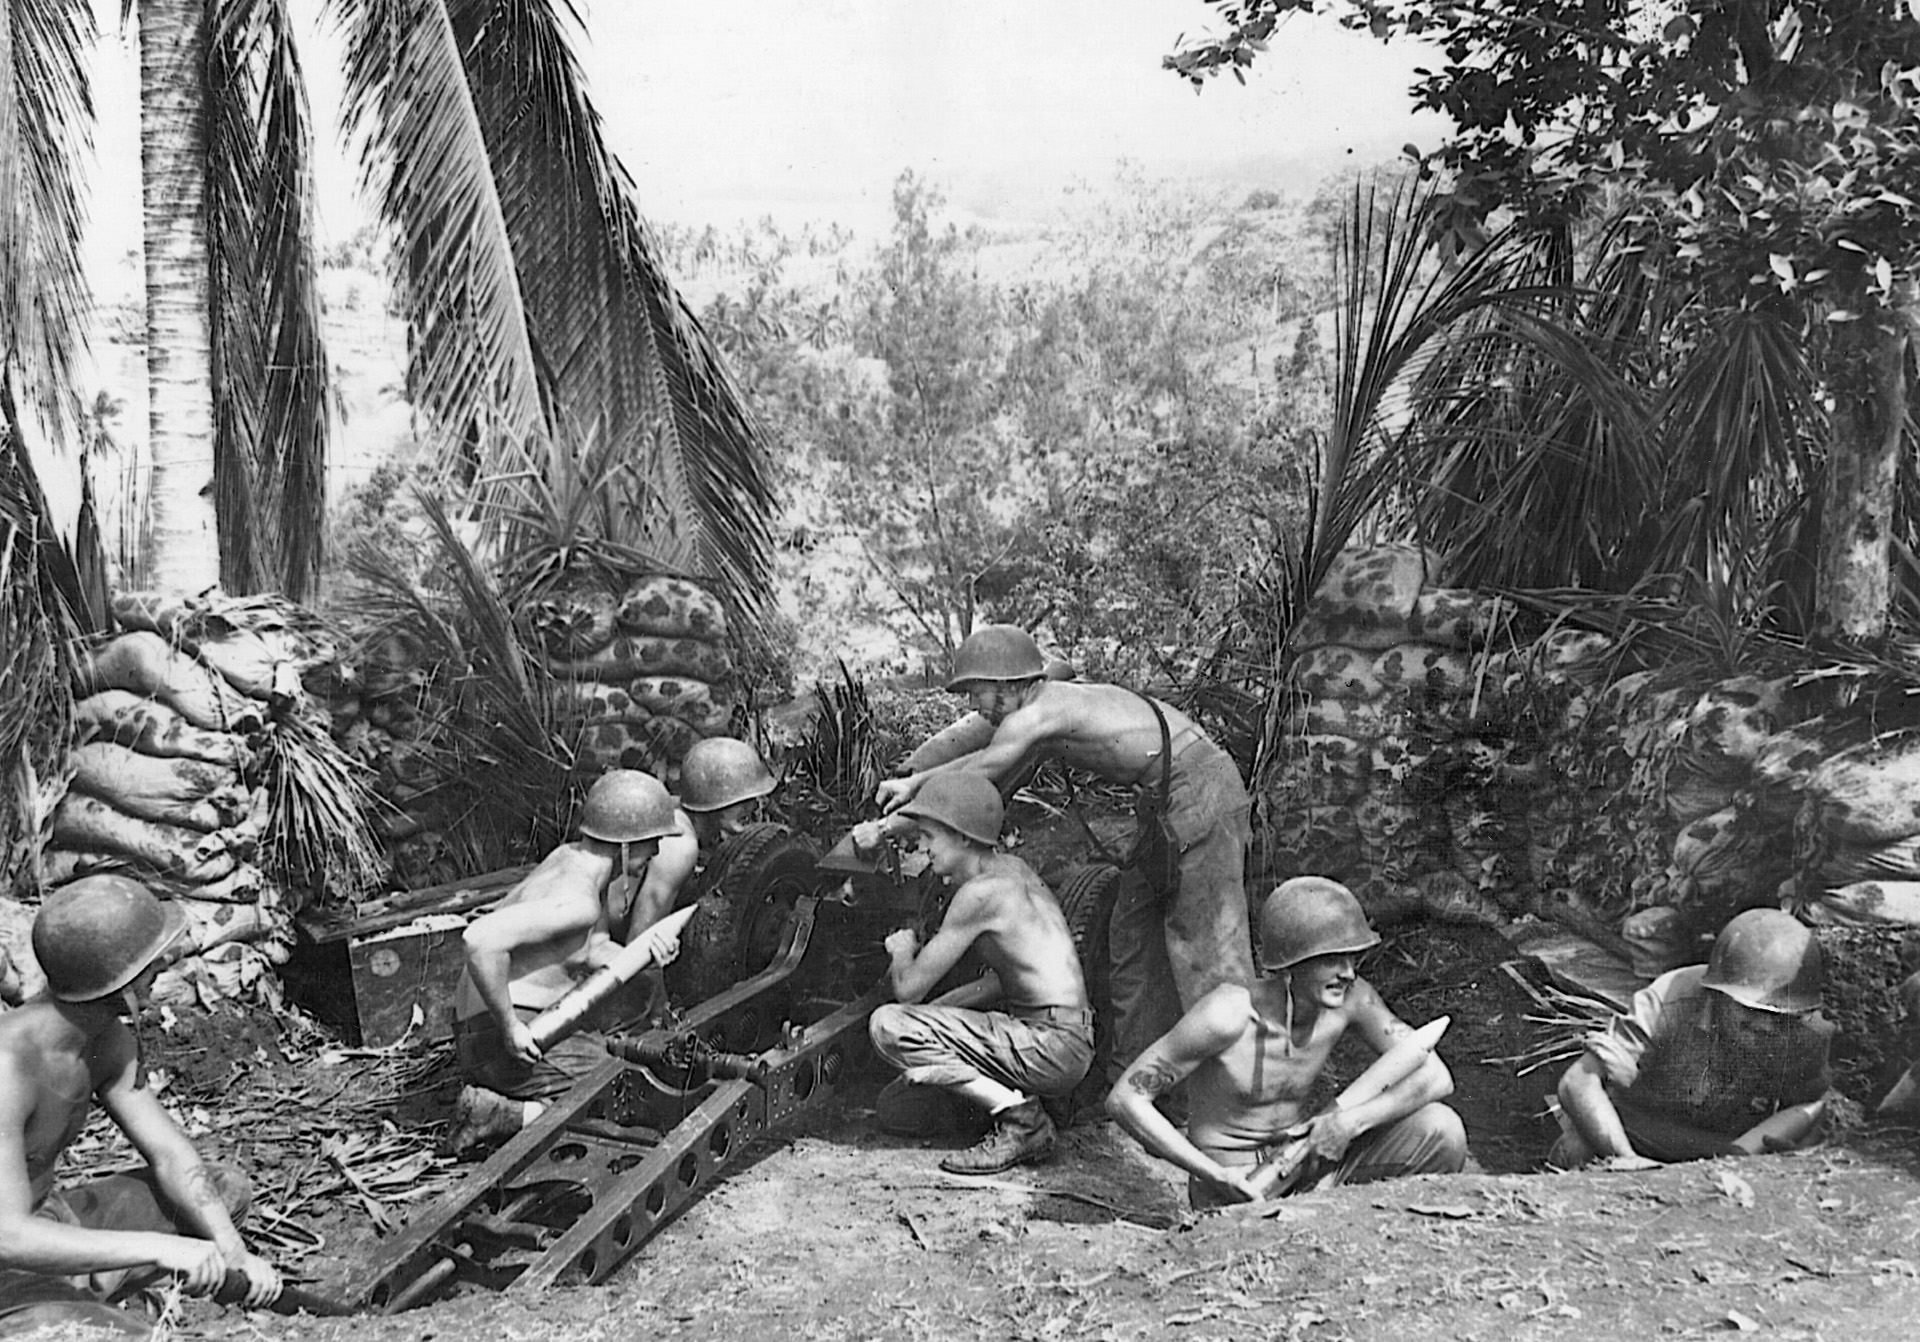 Occupying a former Japanese position, U.S. Marine artillerymen set up their field gun for action. Marine artillery fire was so effective on Guadalcanal that after one engagement a Japanese prisoner asked to see the “automatic” artillery that the Americans were using.